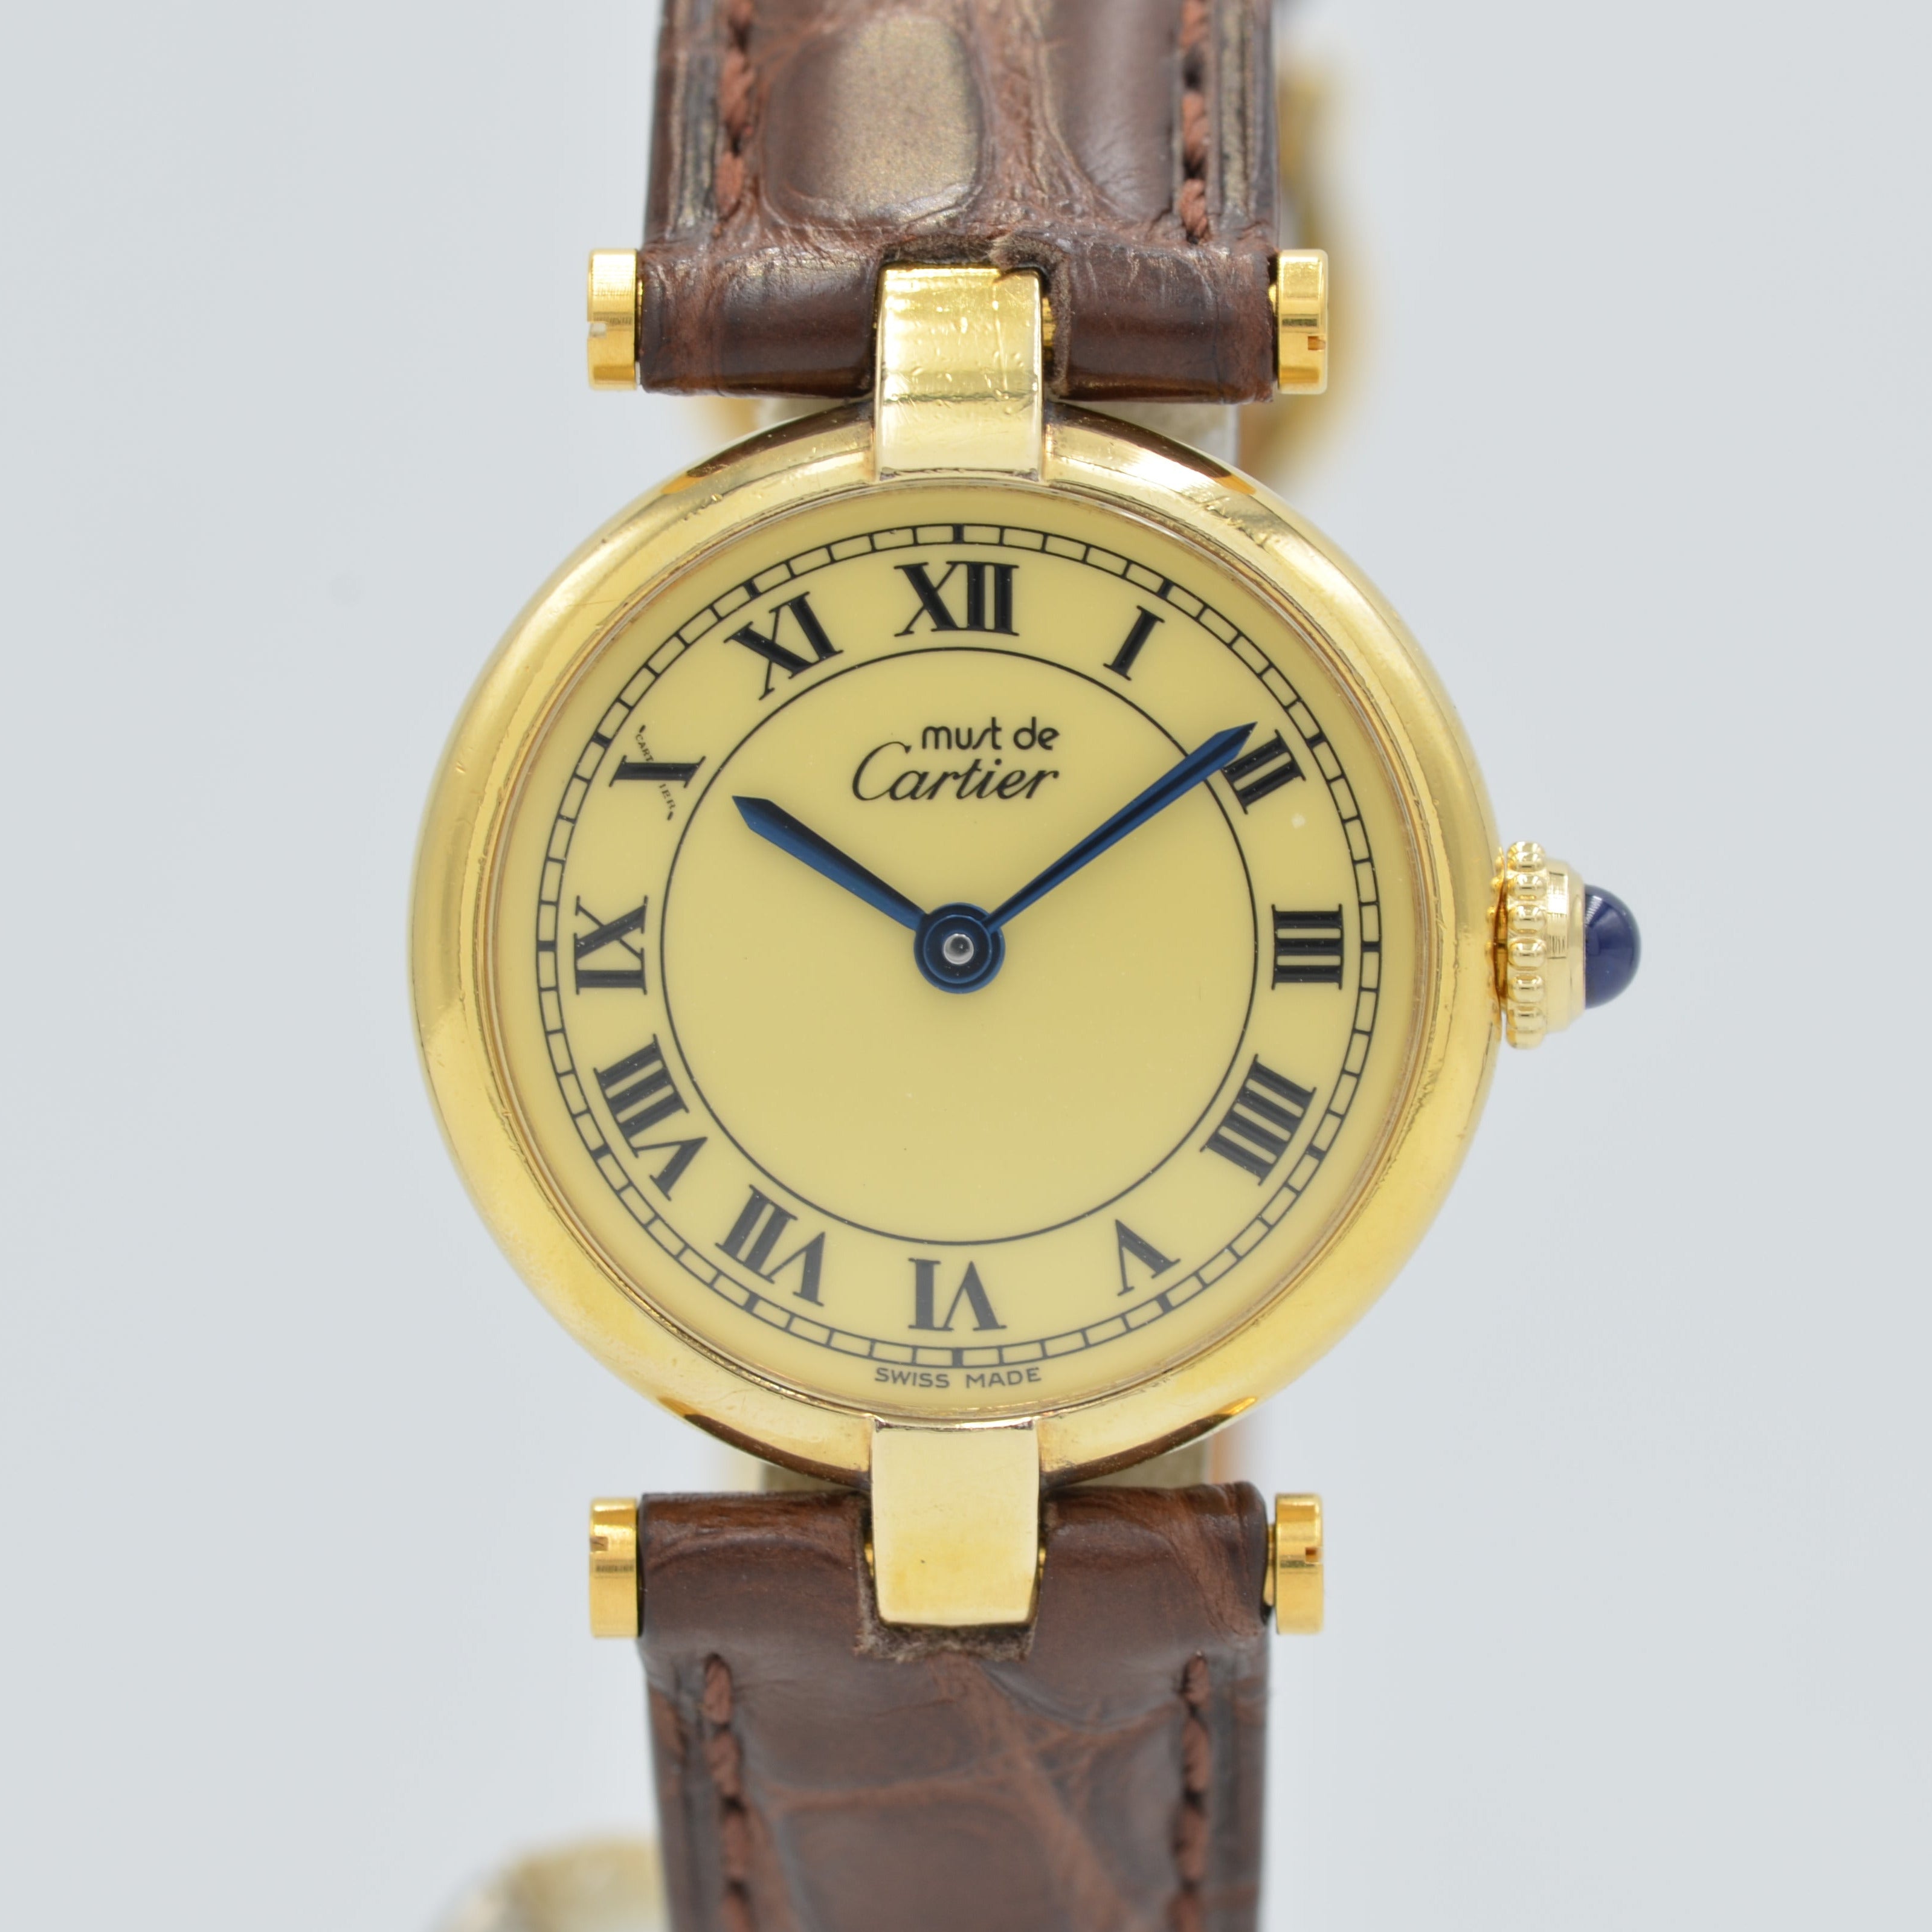 [Cartier] Must Vendome SM Ivory Roma with lifetime warranty